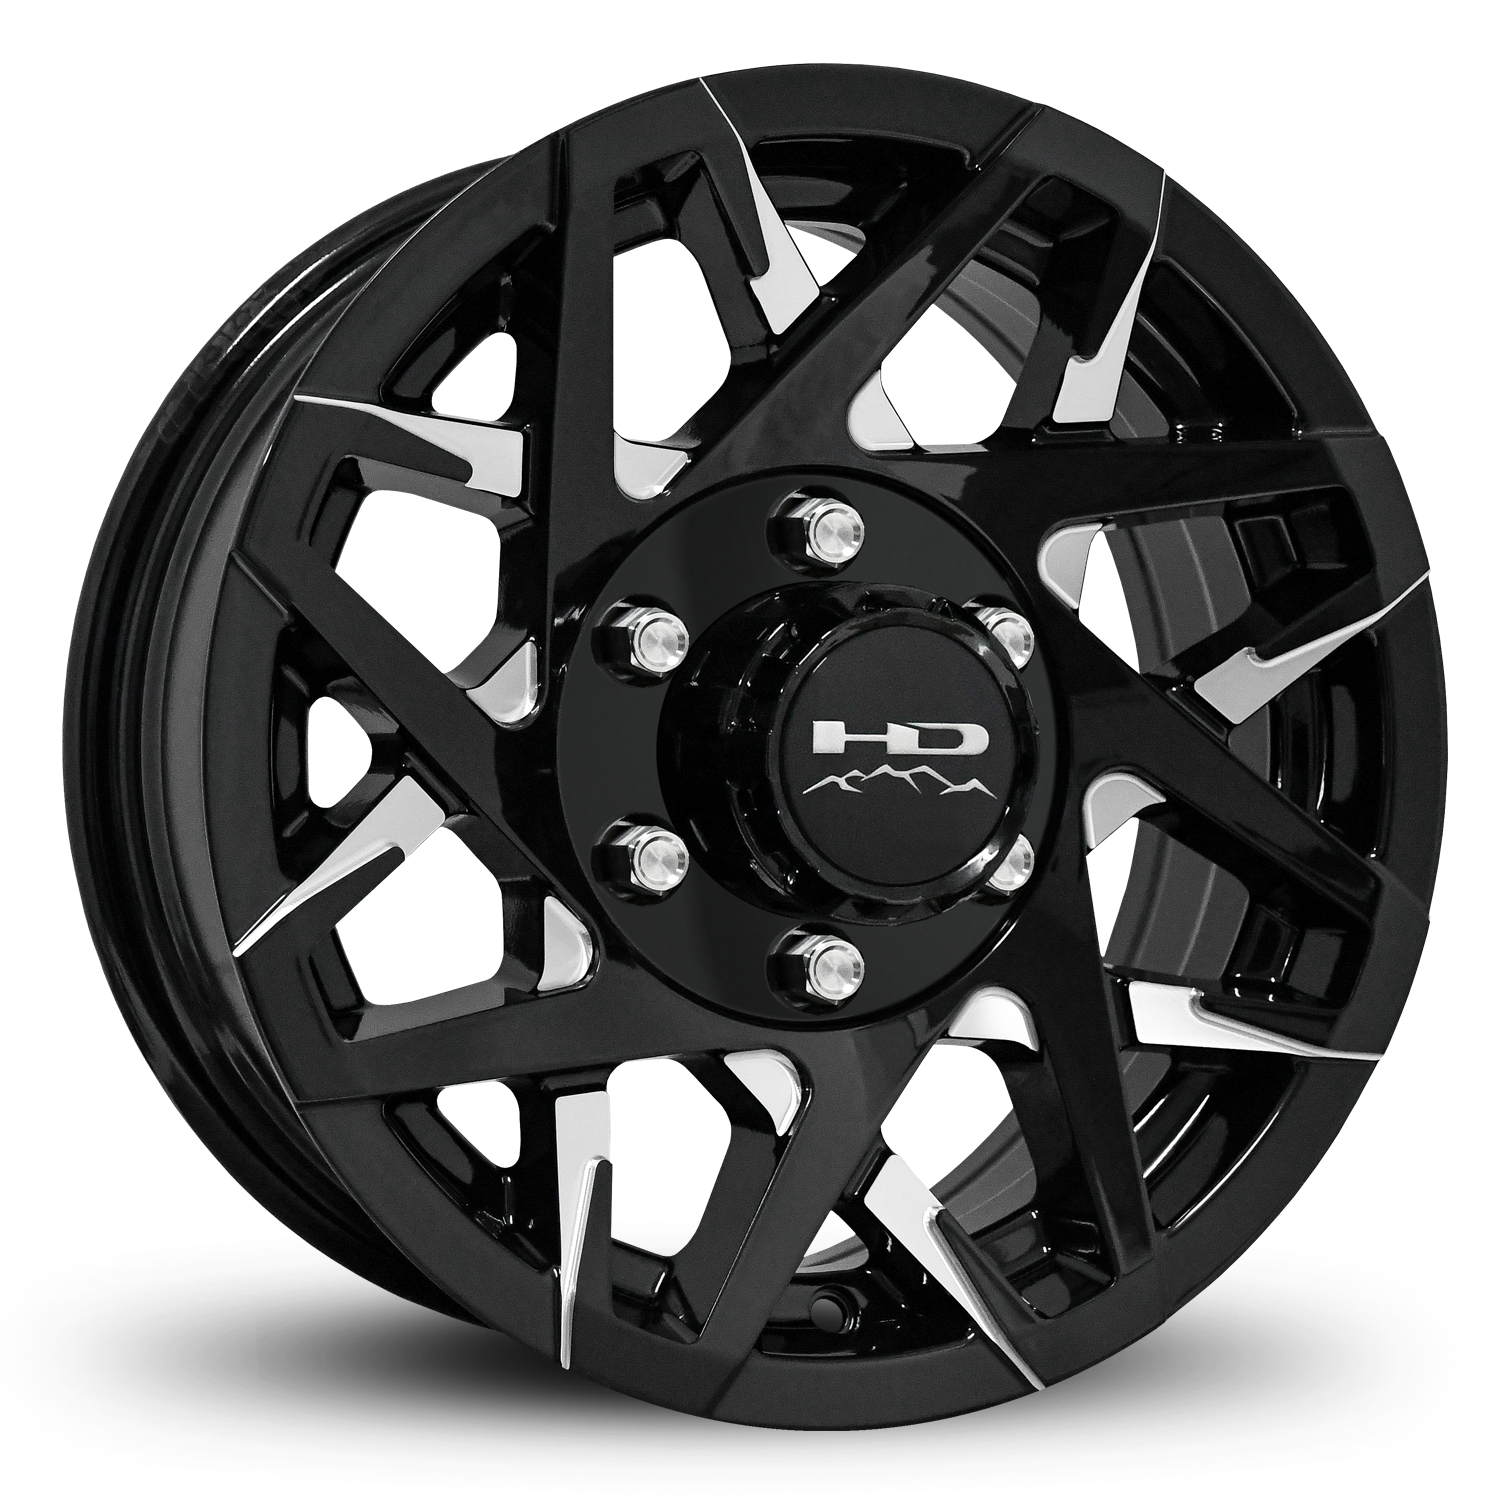 HD Off-Road Canyon Custom Trailer Wheel Rims in 15x6.0  15x6 Gloss Black CNC Milled Face Spokes with Center Cap & Logo fits 6x5.50 / 6x139.7 Axle Boat, Car, RV, Travel, Concession, Horse, Utility, Lawn & Garden, & Landscaping.